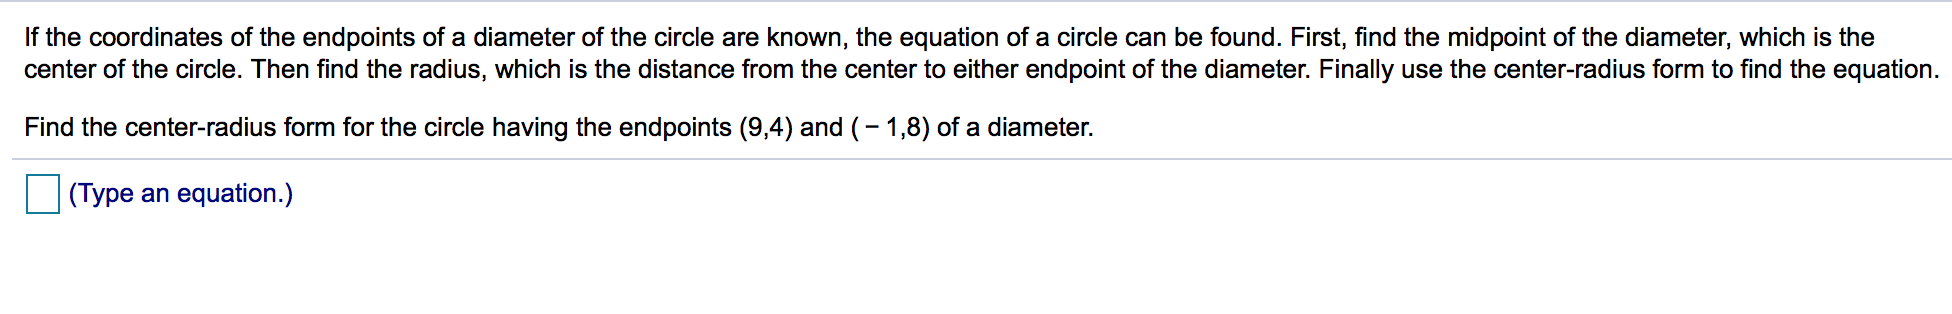 If the coordinates of the endpoints of a diameter of the circle are known, the equation of a circle can be found. First, find the midpoint of the diameter, which is the
center of the circle. Then find the radius, which is the distance from the center to either endpoint of the diameter. Finally use the center-radius form to find the equation.
Find the center-radius form for the circle having the endpoints (9,4) and (-1,8) of a diameter.
(Type an equation.)
